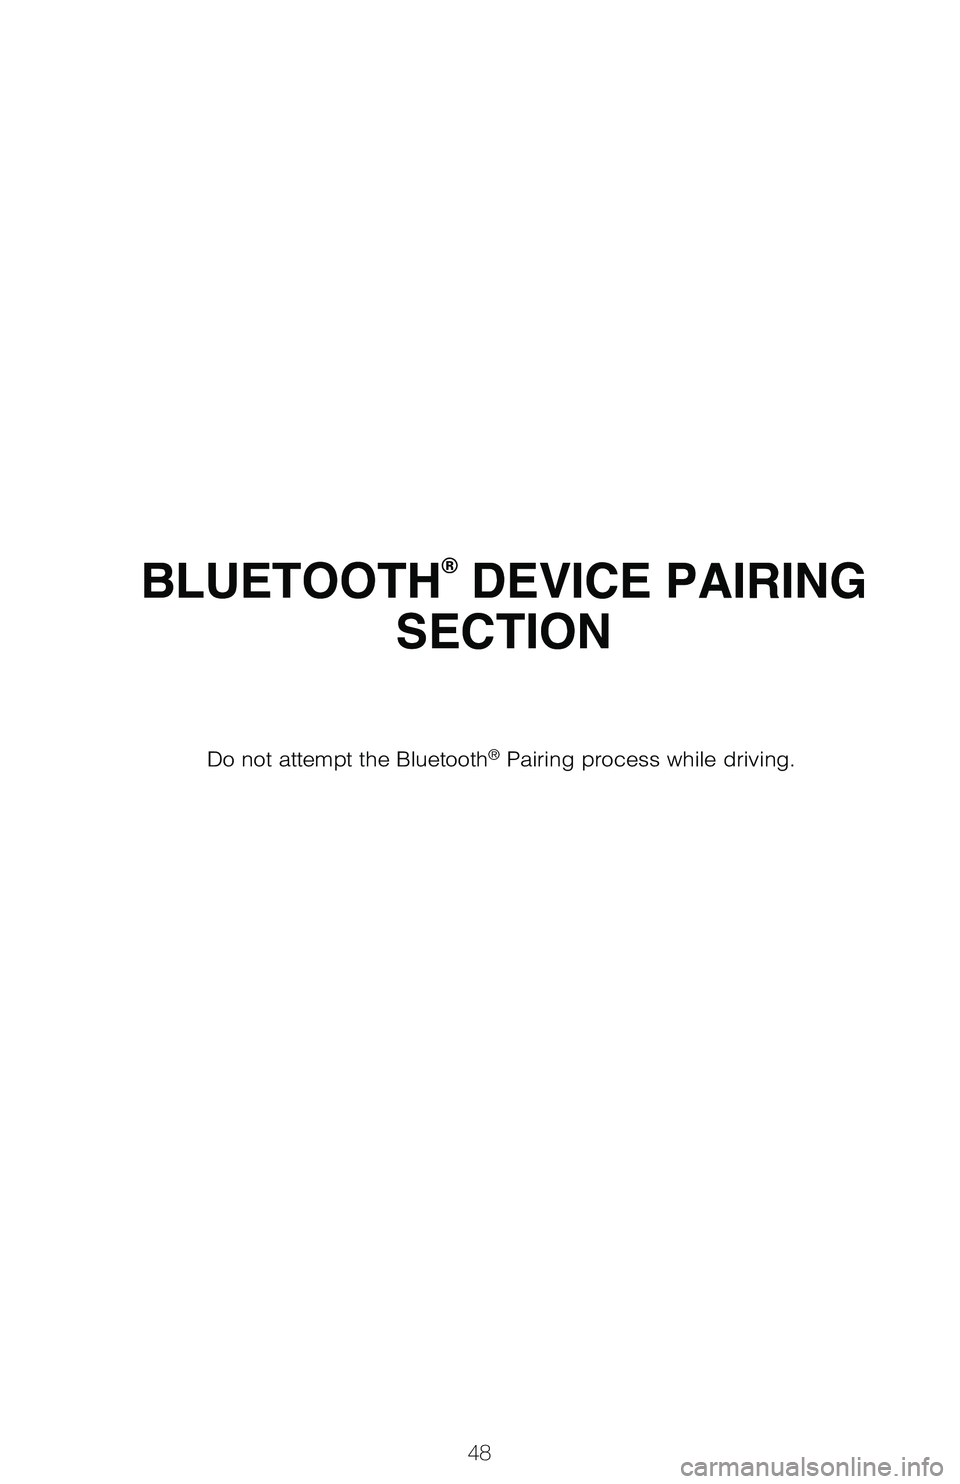 TOYOTA C-HR 2021  Owners Manual (in English) 48
BLUETOOTH® DEVICE PAIRING 
SECTION
Do not attempt the Bluetooth® Pairing process while driving.
64380_Txt_MY21_C-HR.indd   487/21/20   10:32 AM 